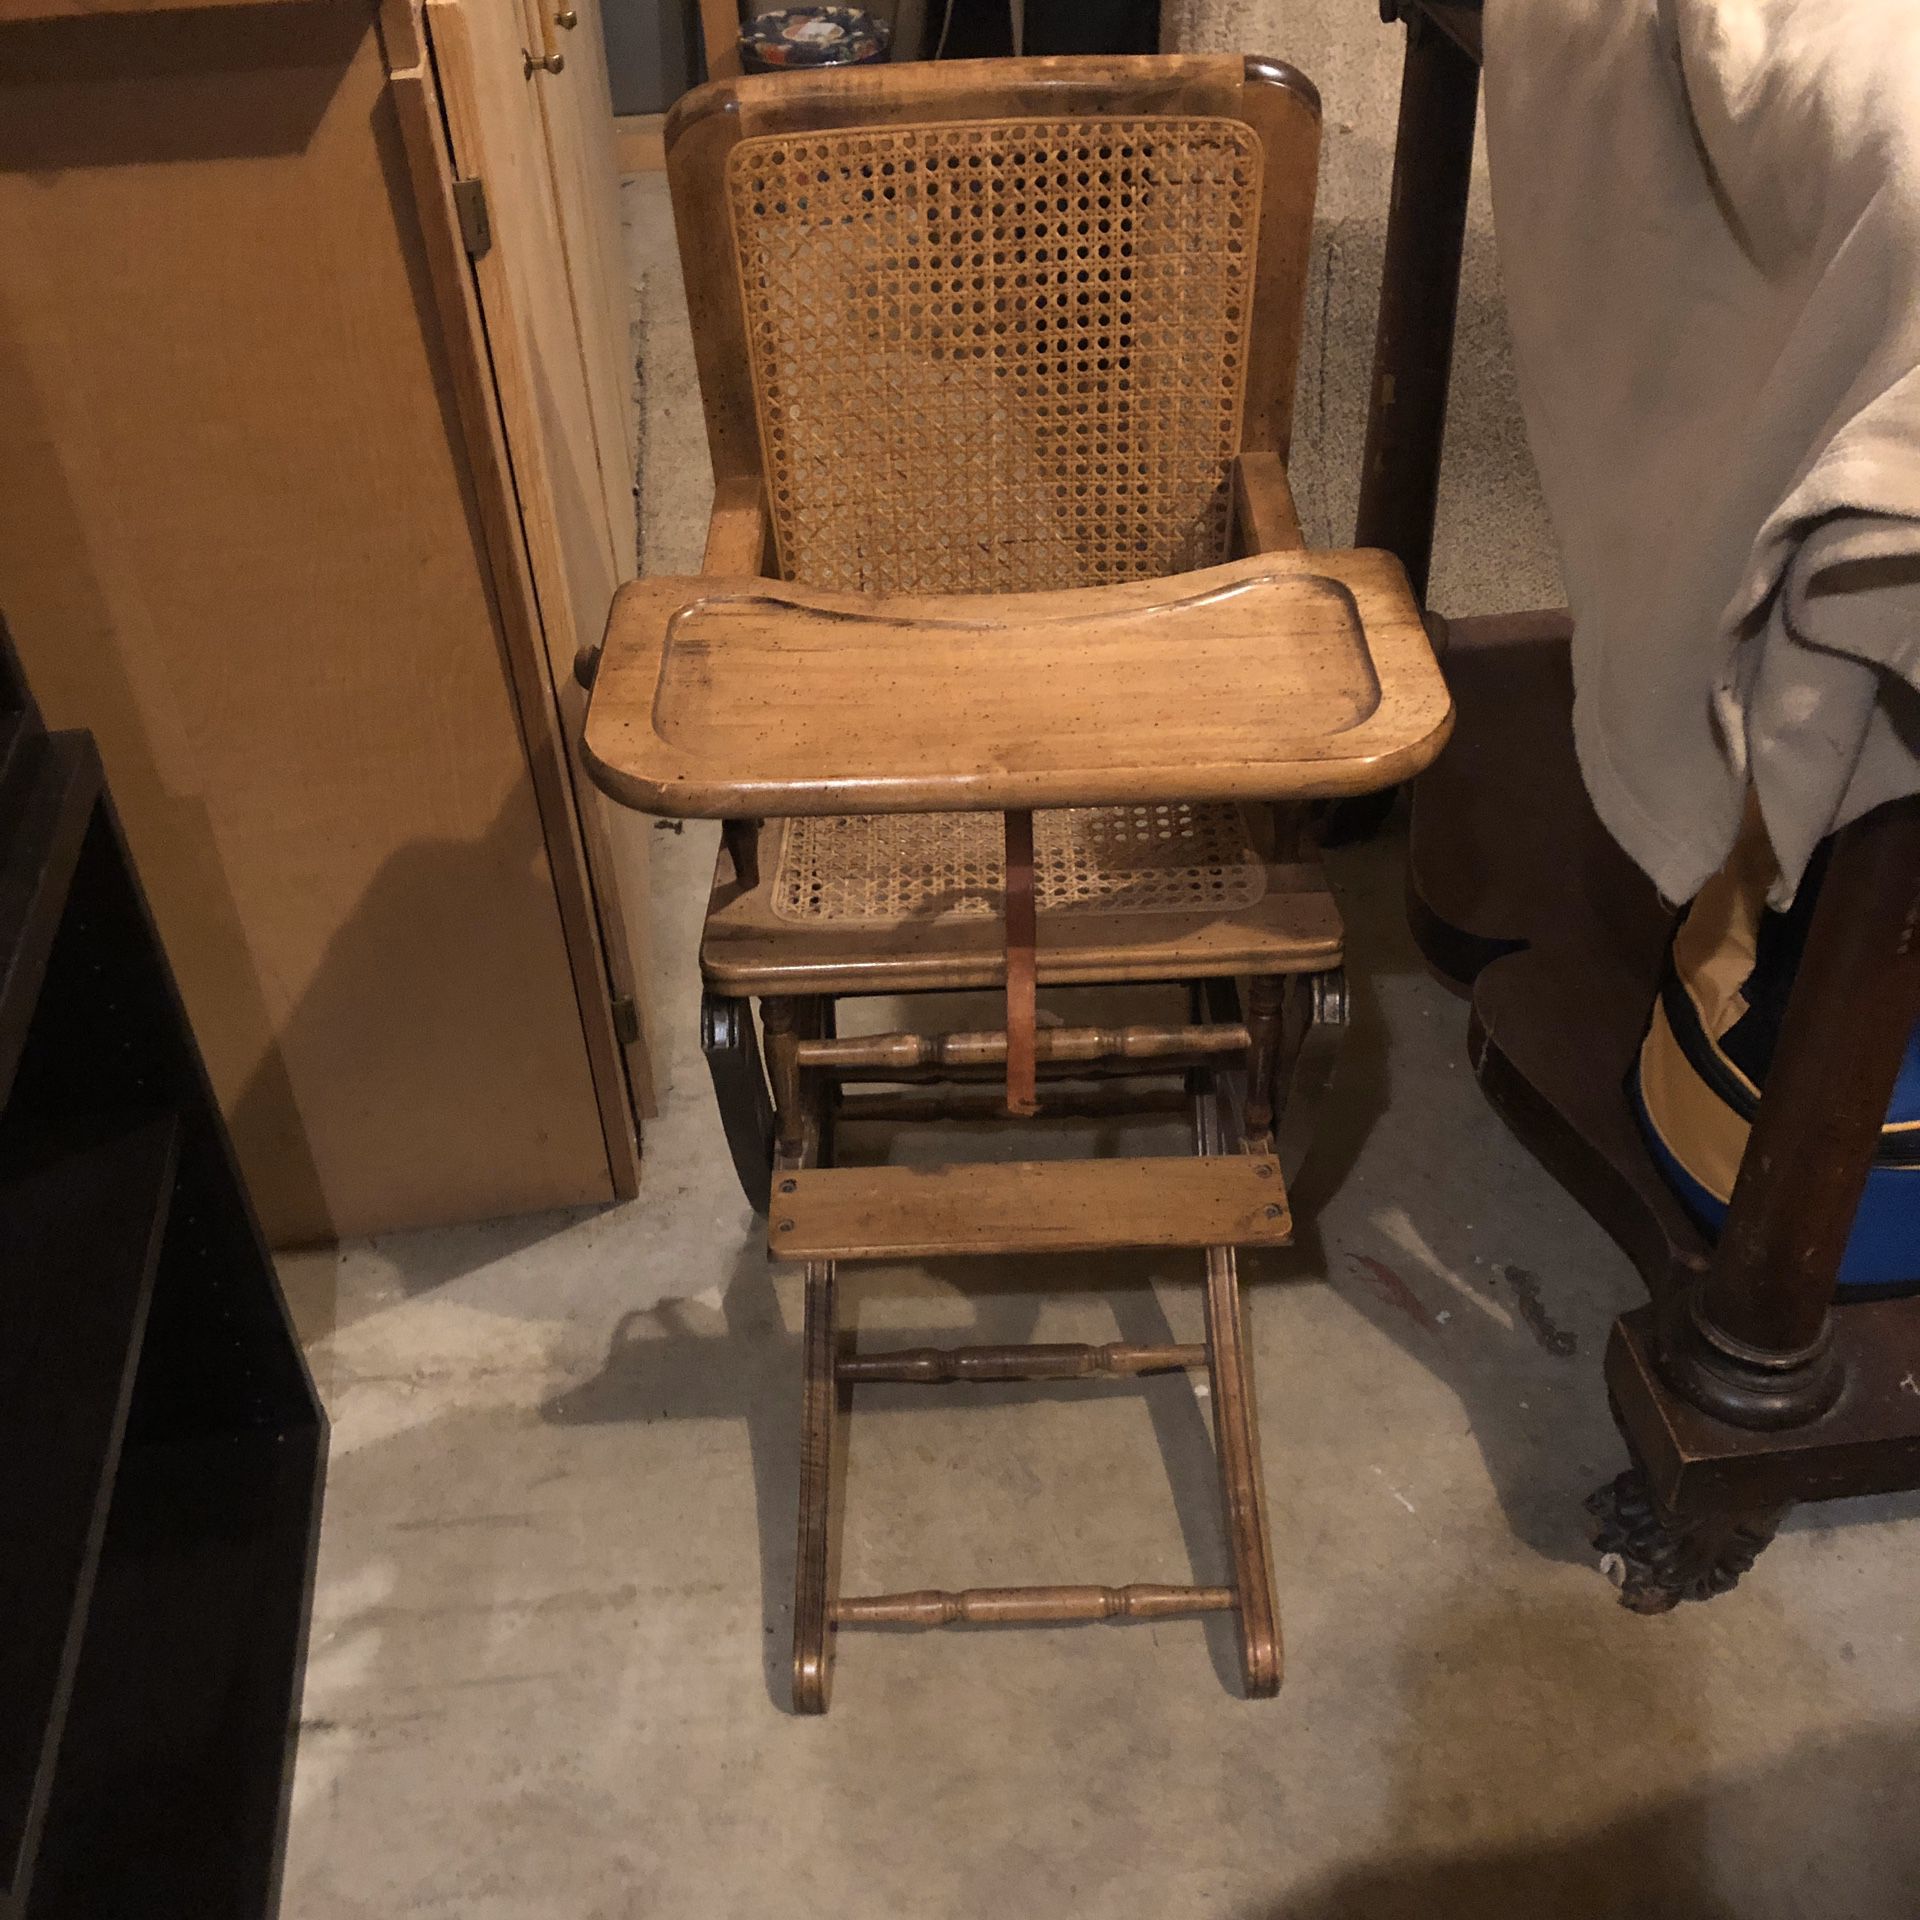 Antique high chair that changes to rocker